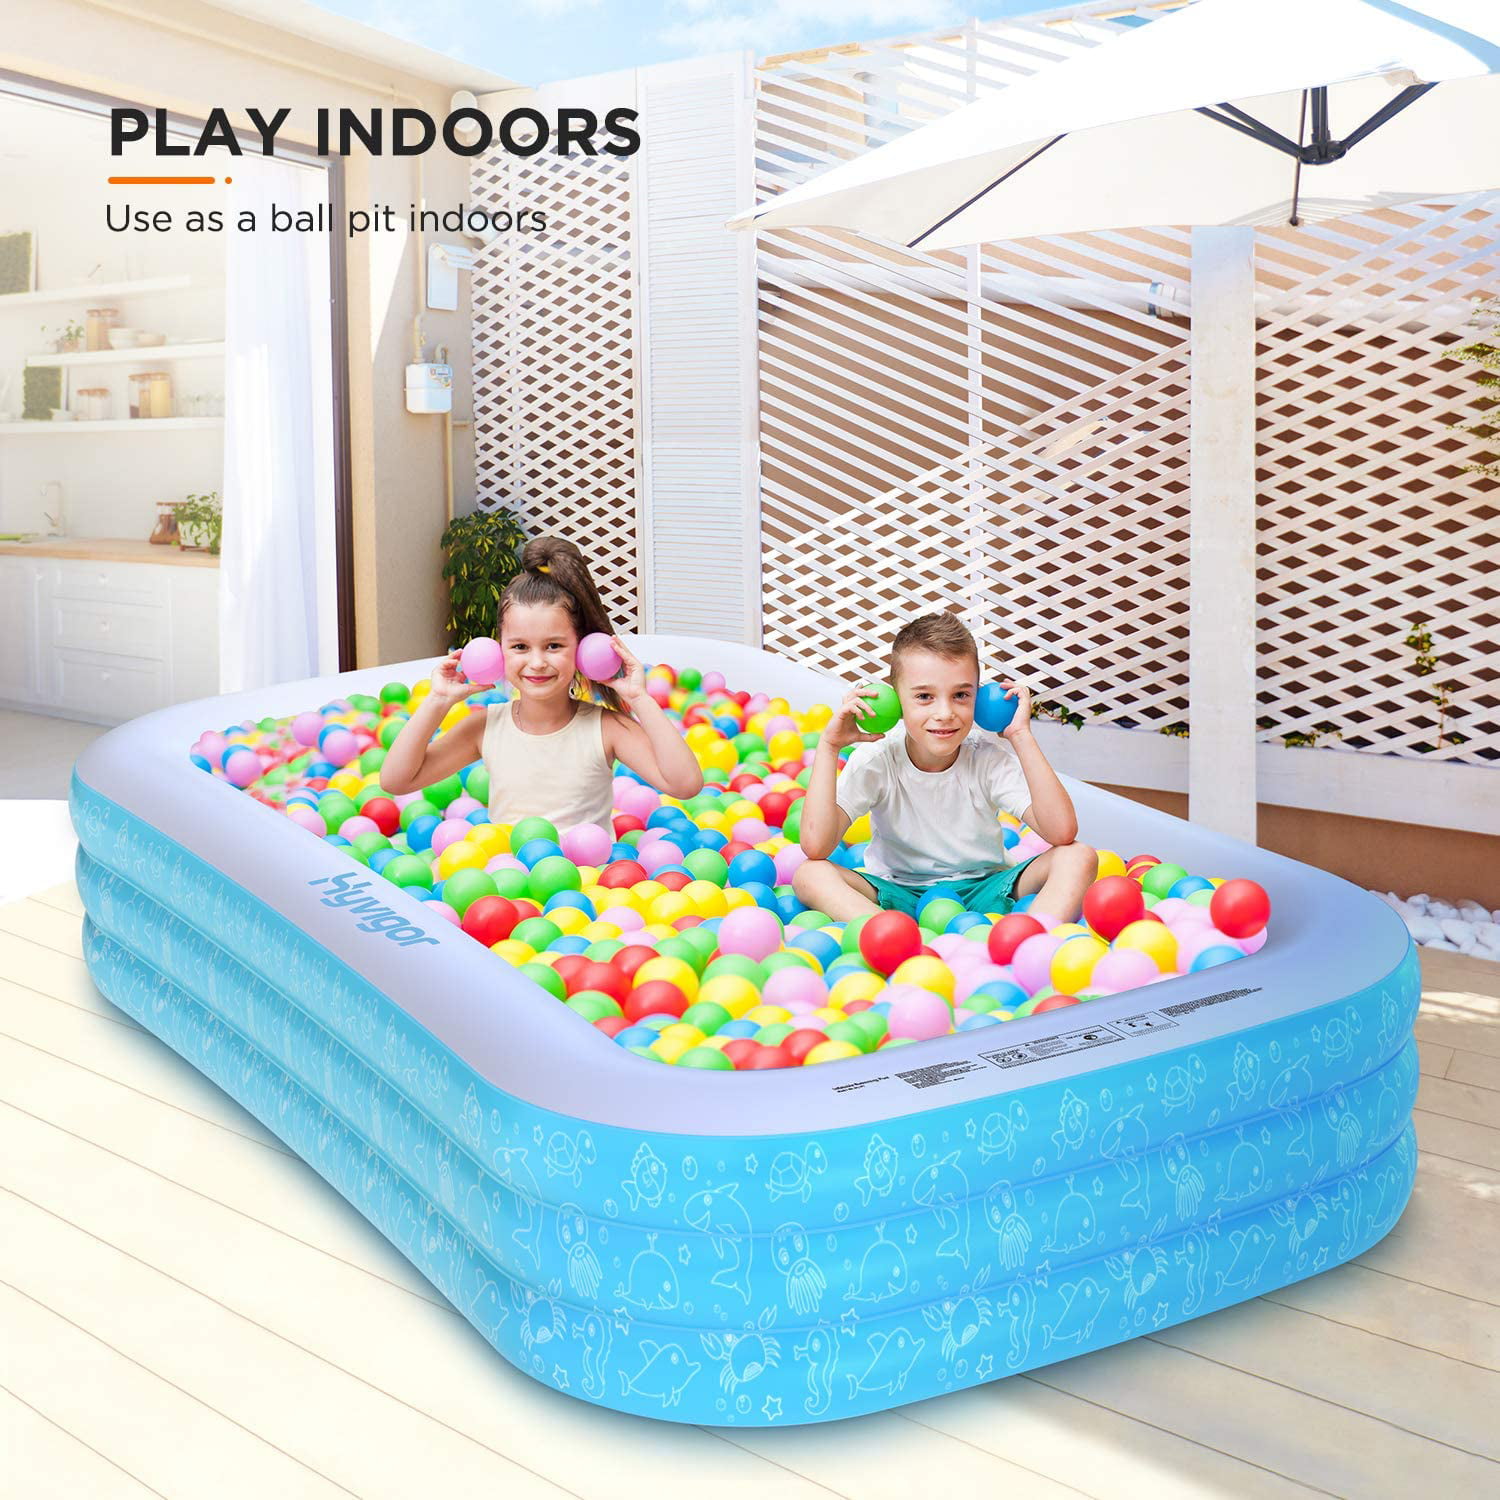 and Baby Ball Pit Hyvigor Inflatable Swimming Pool for Kids 95x56x22 Blow Up Rectangular Pools Above Ground for Adults & Kiddie Outdoor Big Rectangle Family Pool for Backyard Summer Water Games